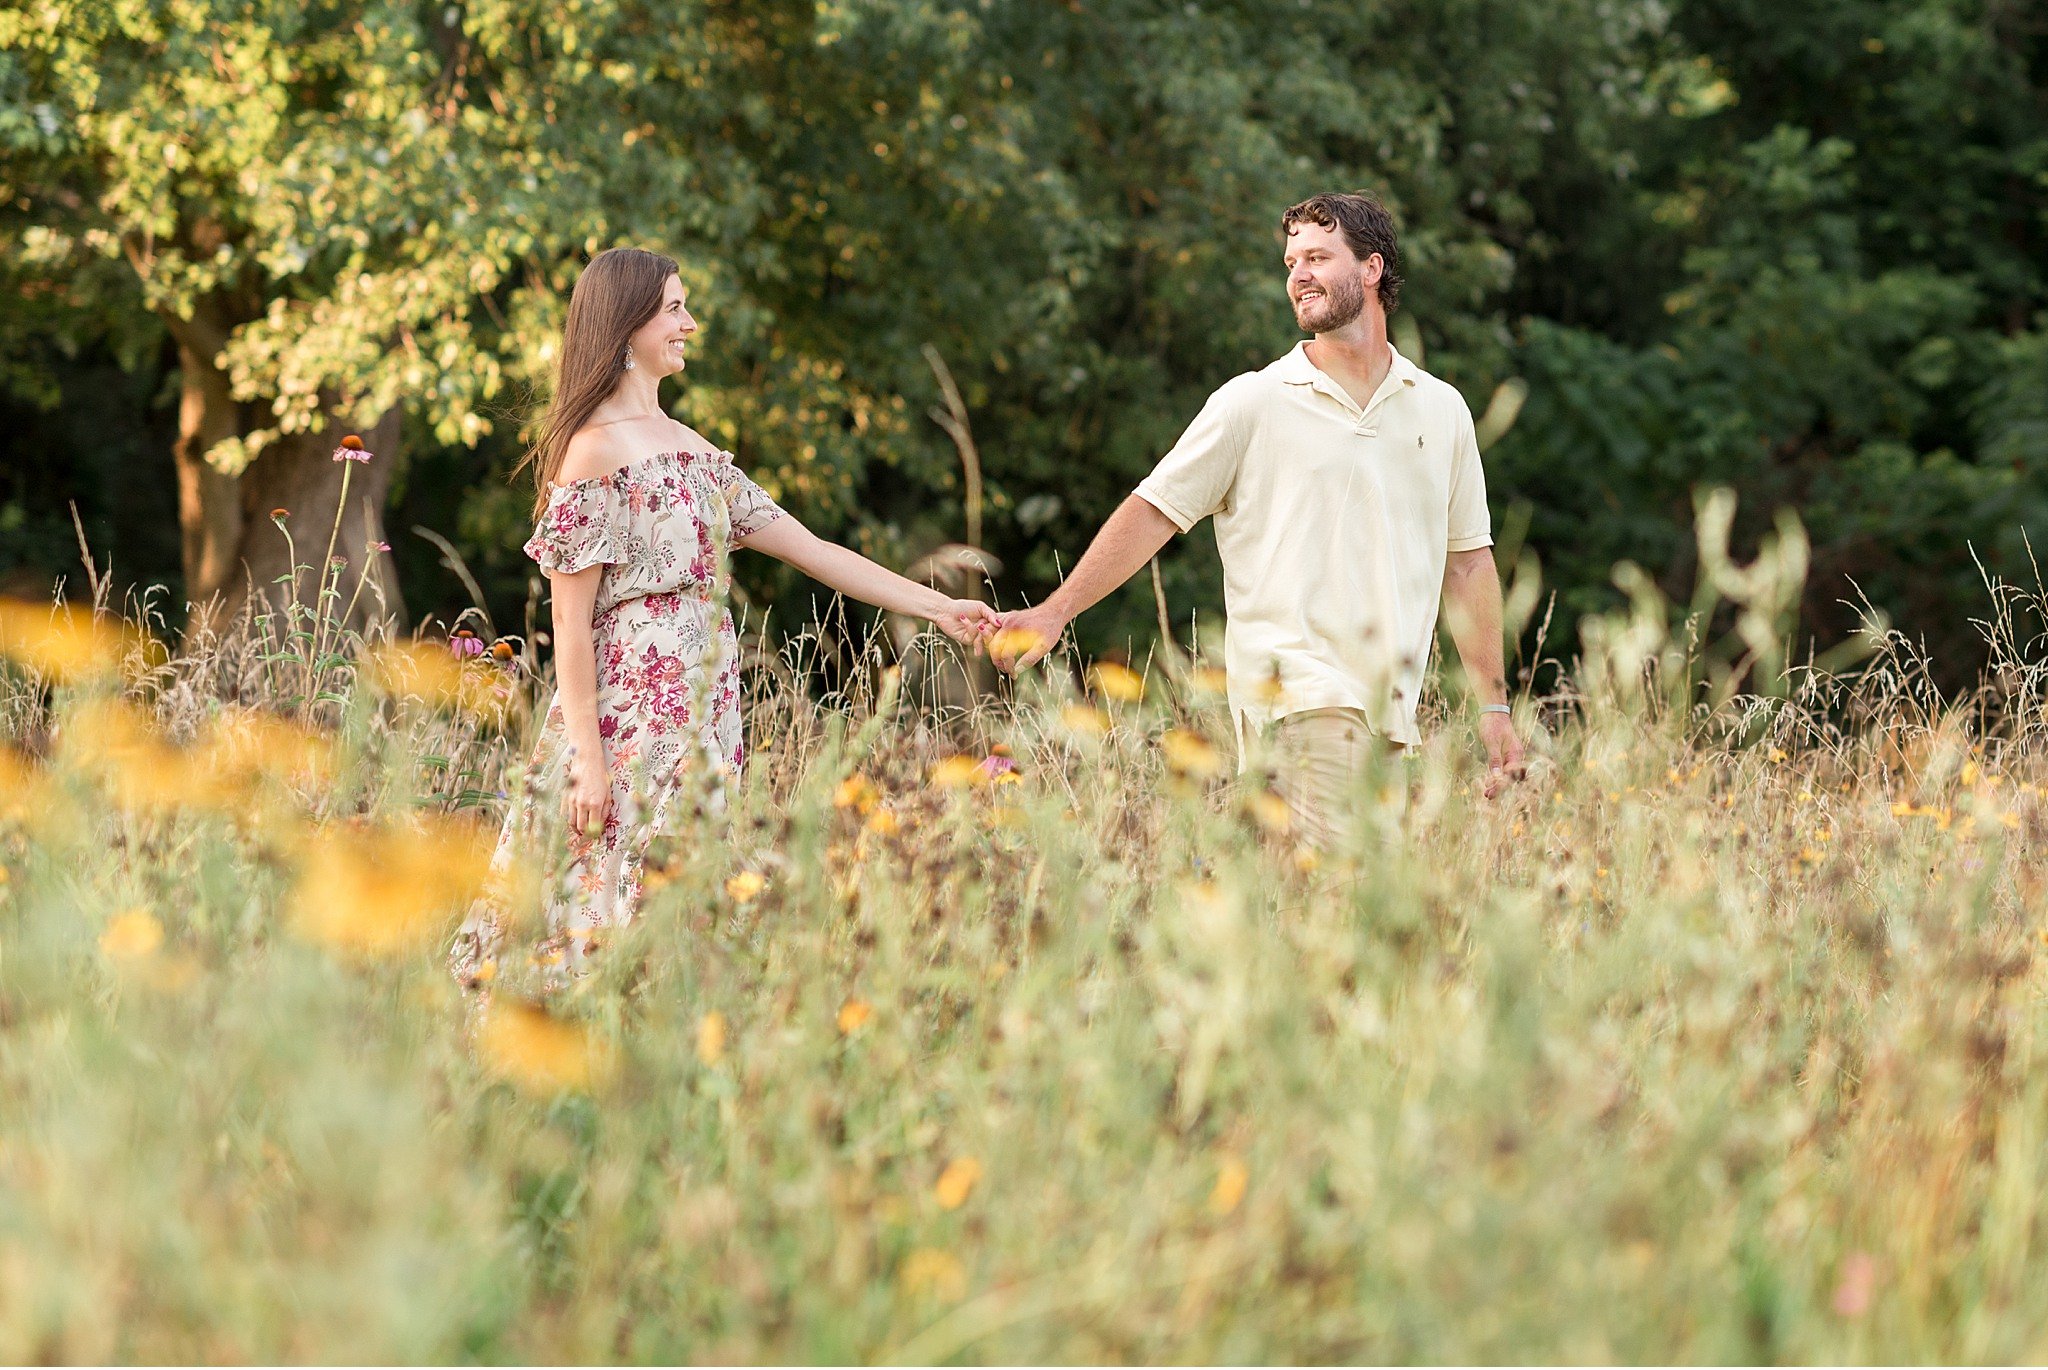 Chickies Rock Lancaster PA Summer sunset engagement session 